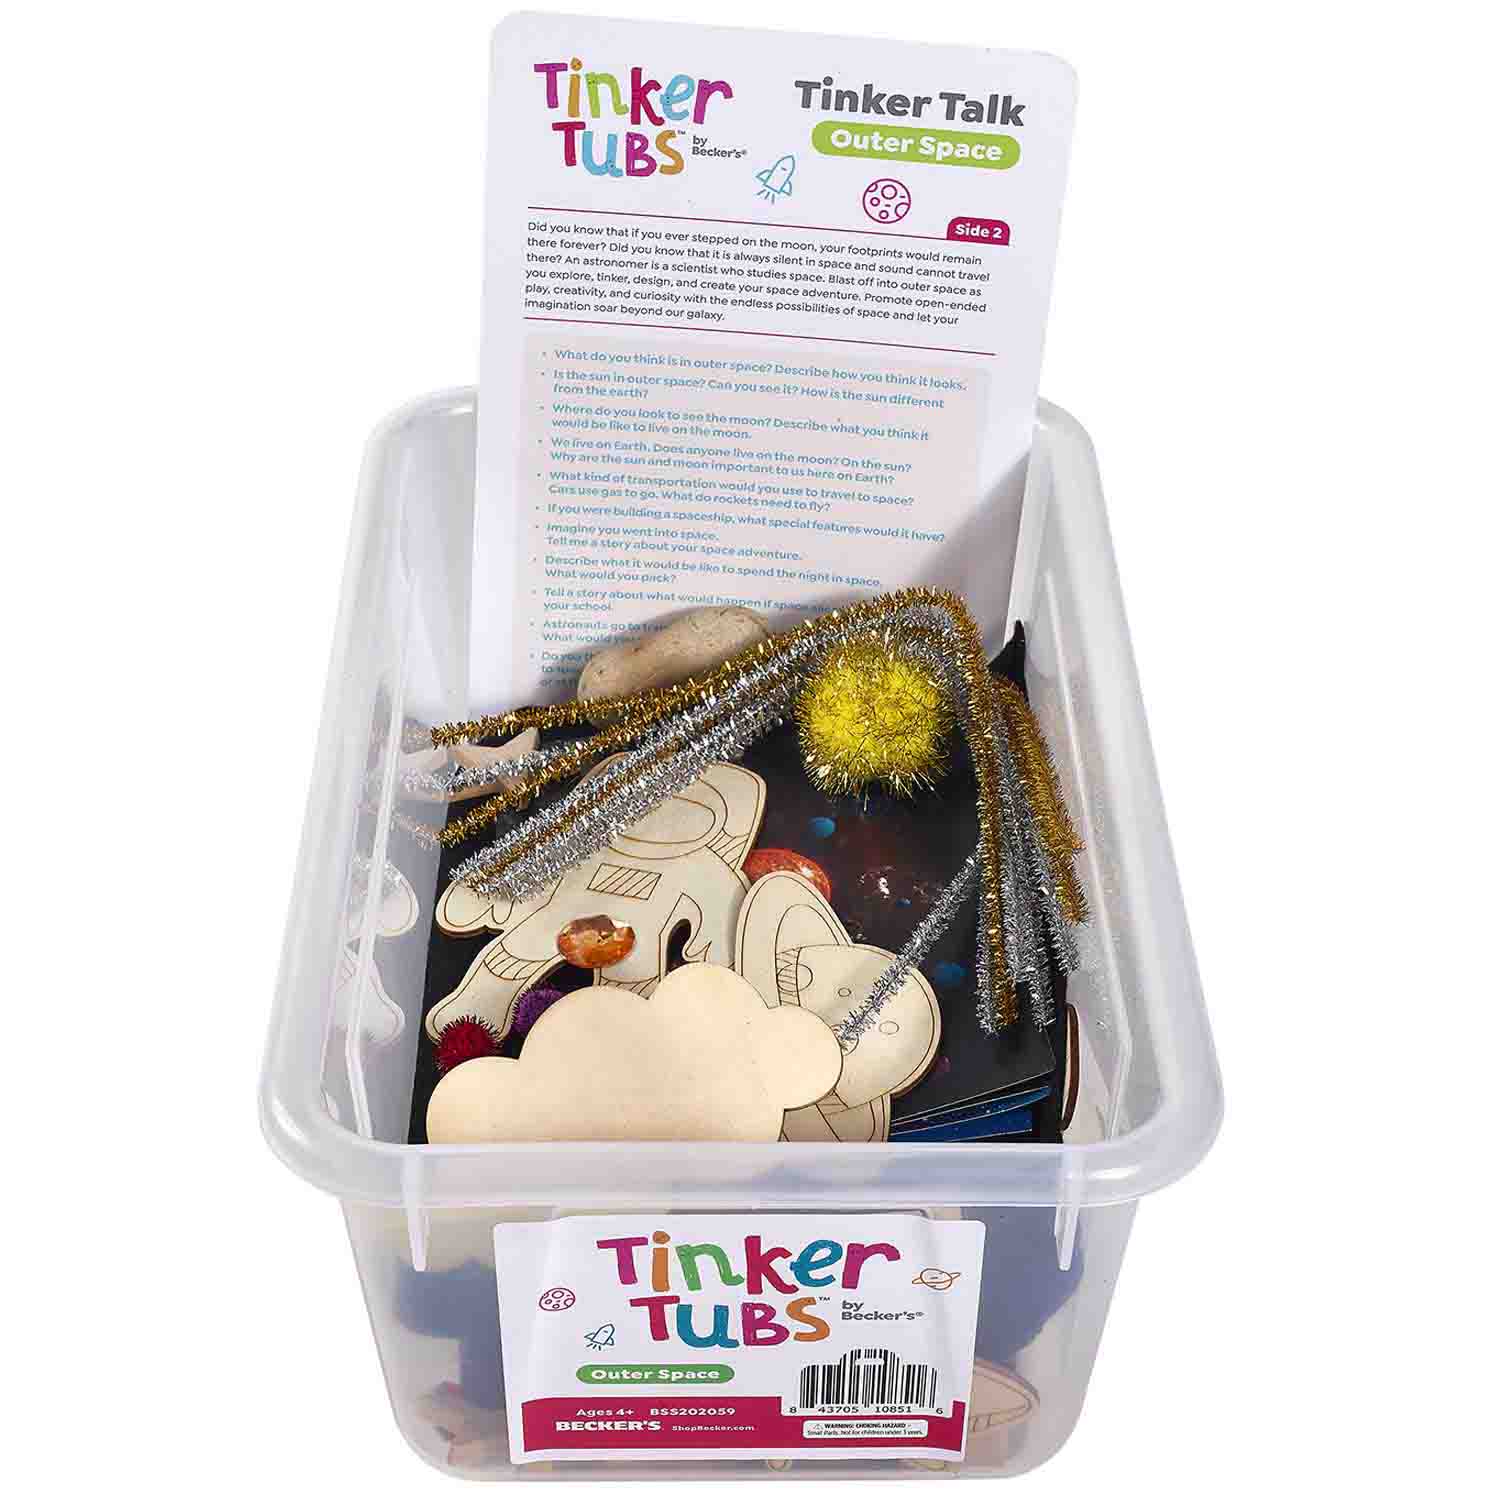 Becker's Outer Space Tinker Tub